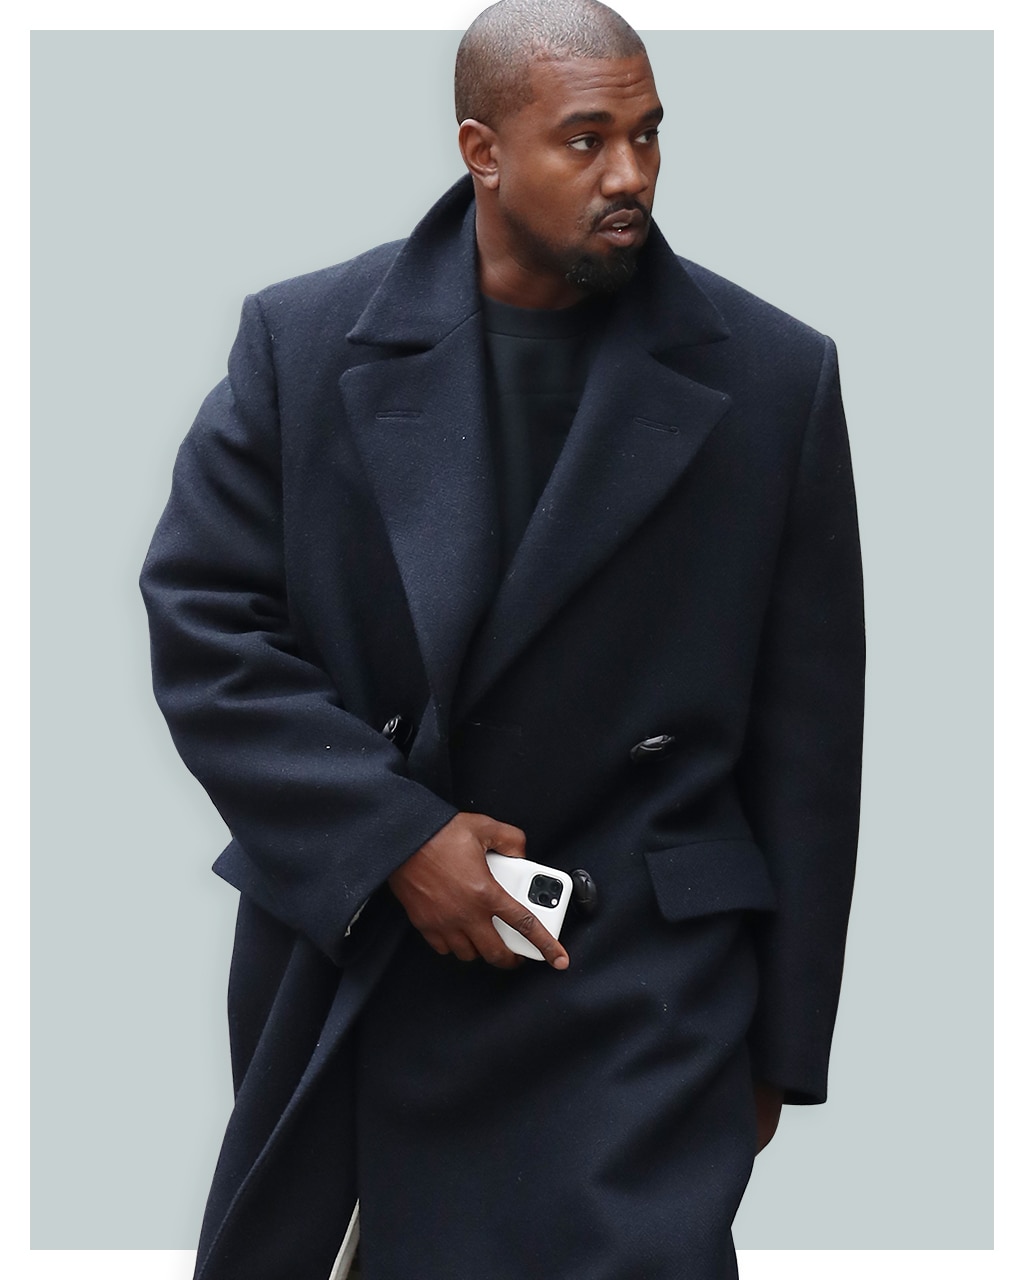 Why We're Obsessed With Mr Kanye West's Big Coat | The Journal | MR PORTER